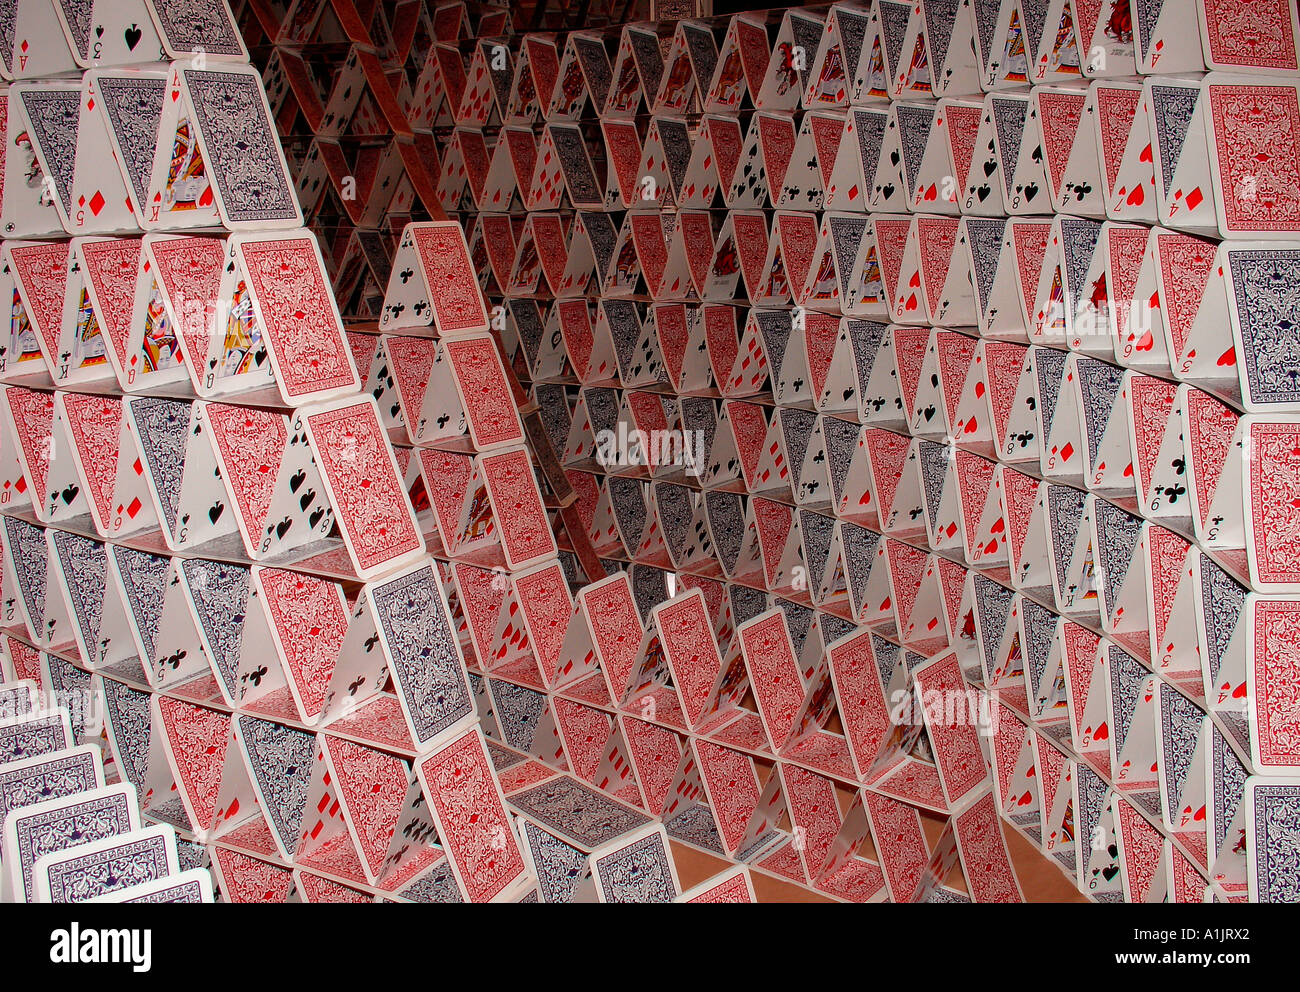 Pyramid of playing cards Stock Photo